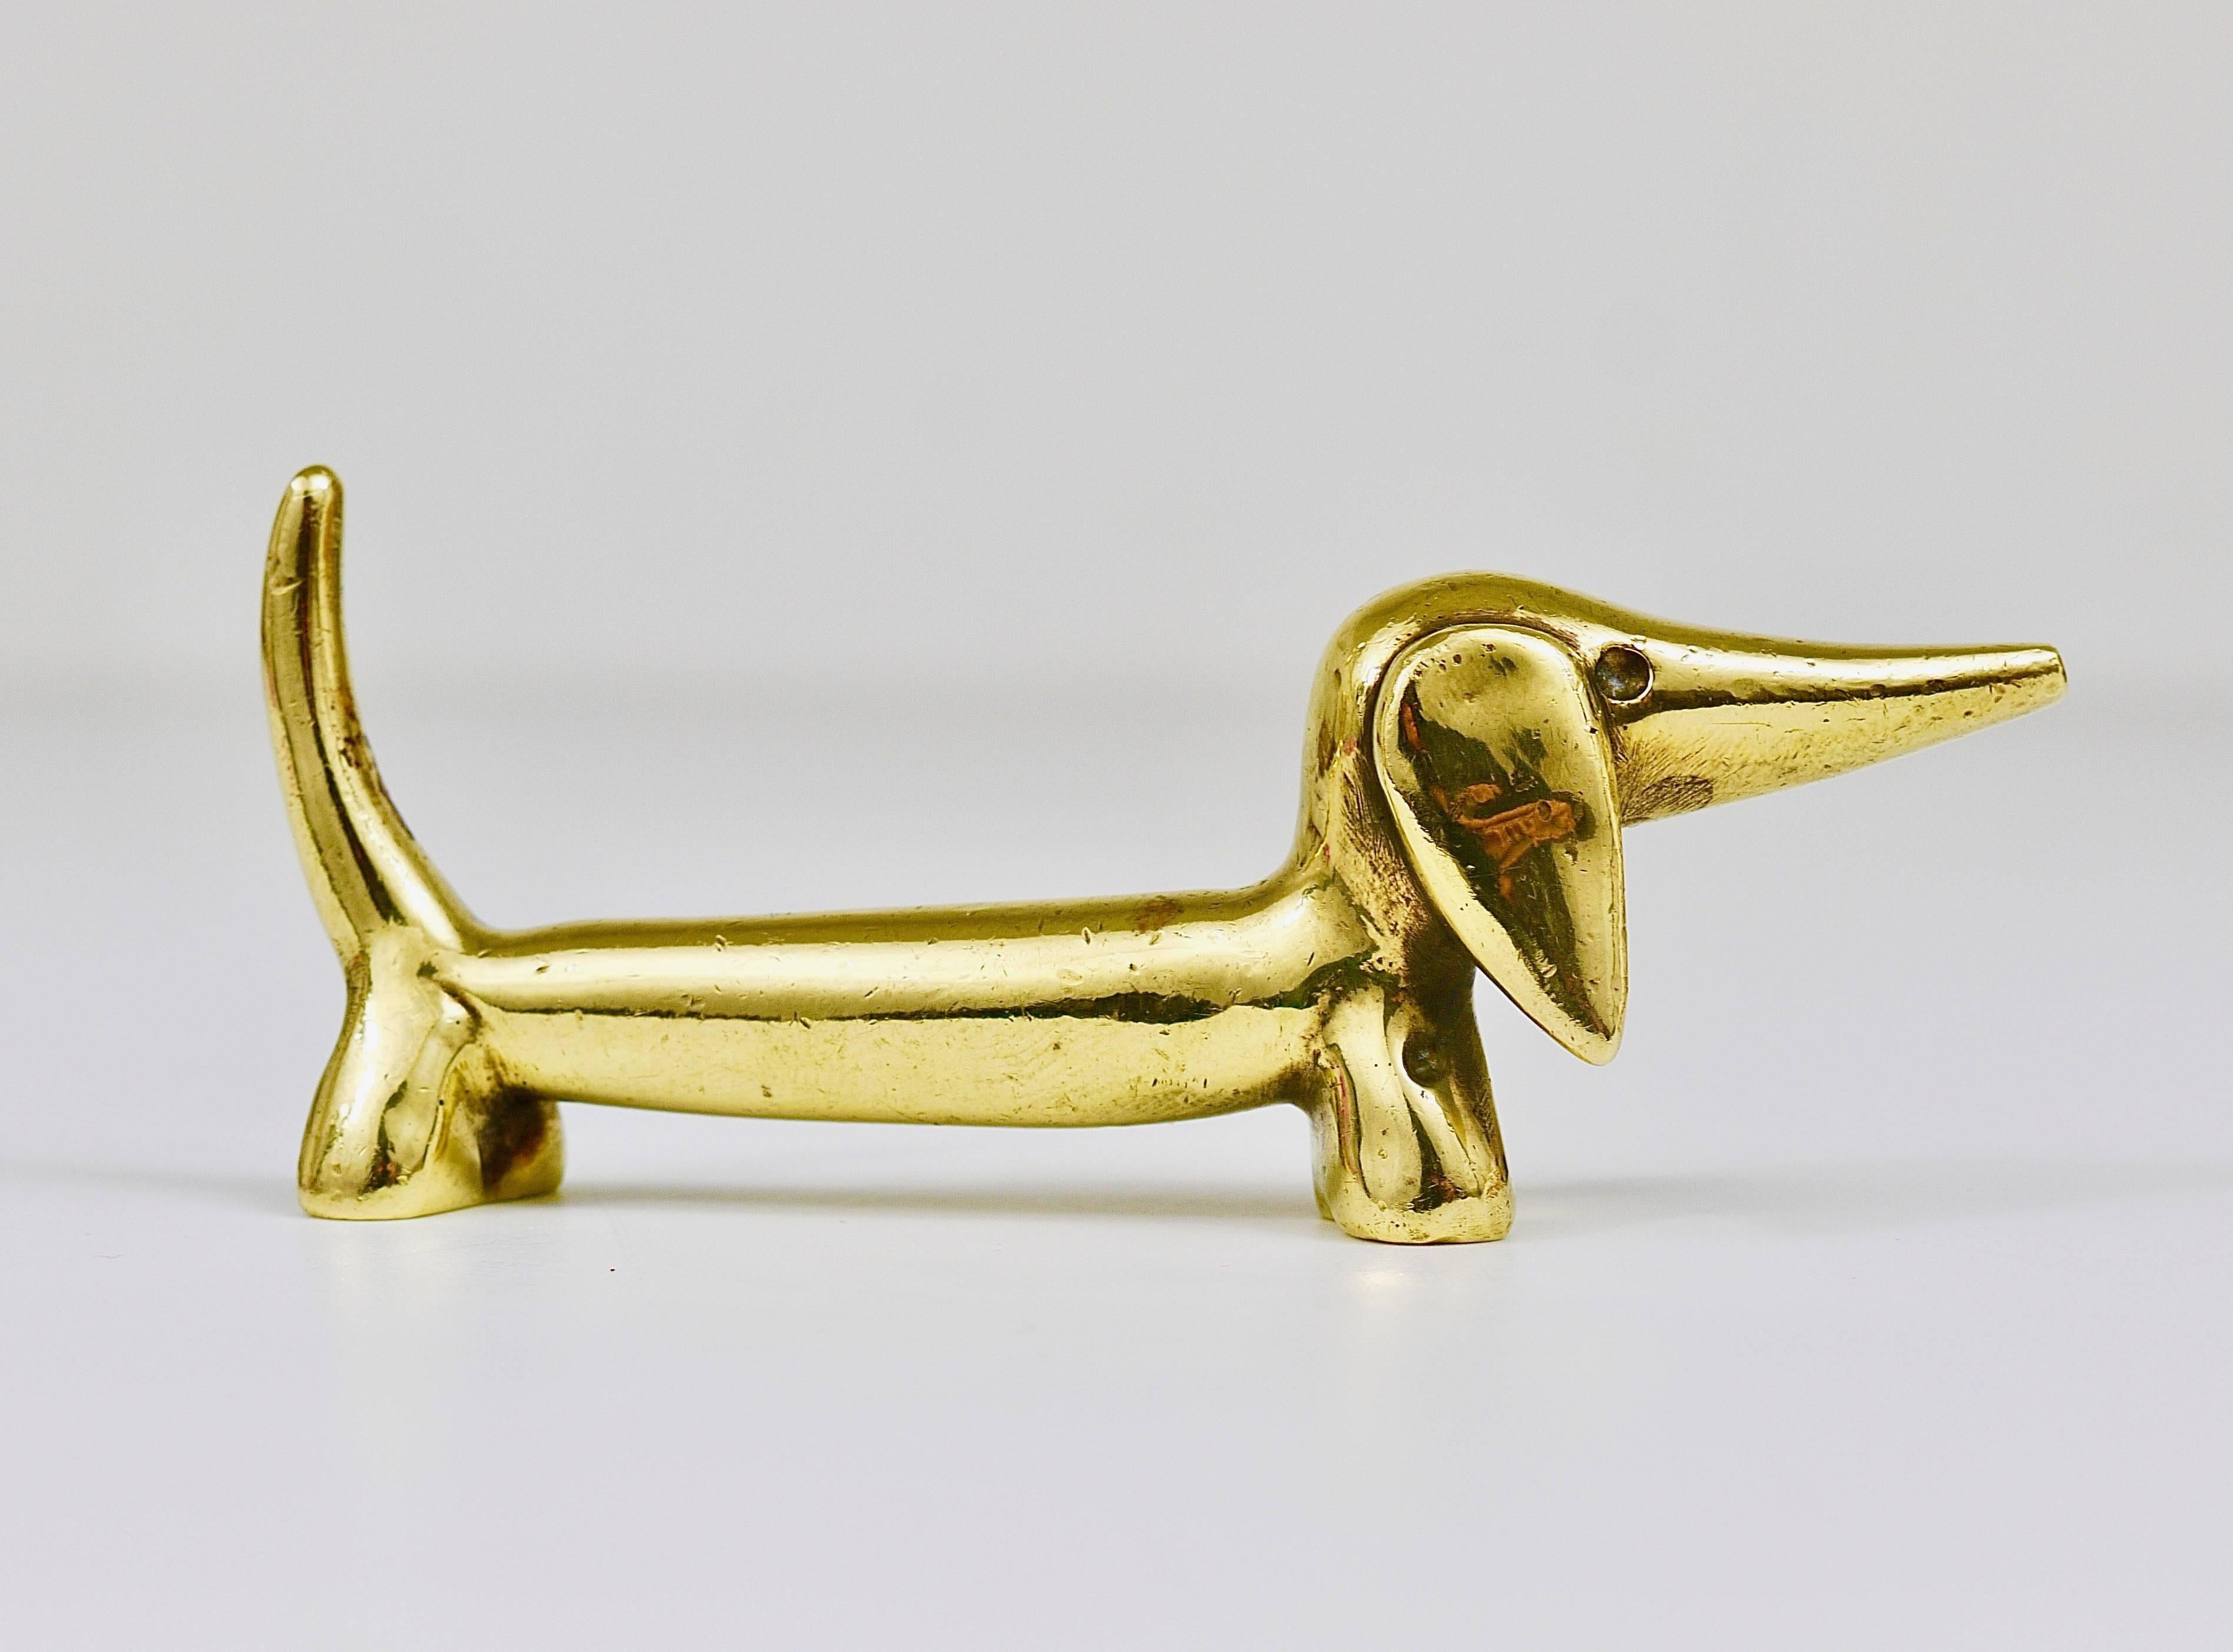 A lovely sausage dog sculpture made of brass from the 1950s. Designed by Walter Bosse, executed by Hertha Baller. In good condition with charming patina. We offer other Walter Bosse brass objects in our other listings.